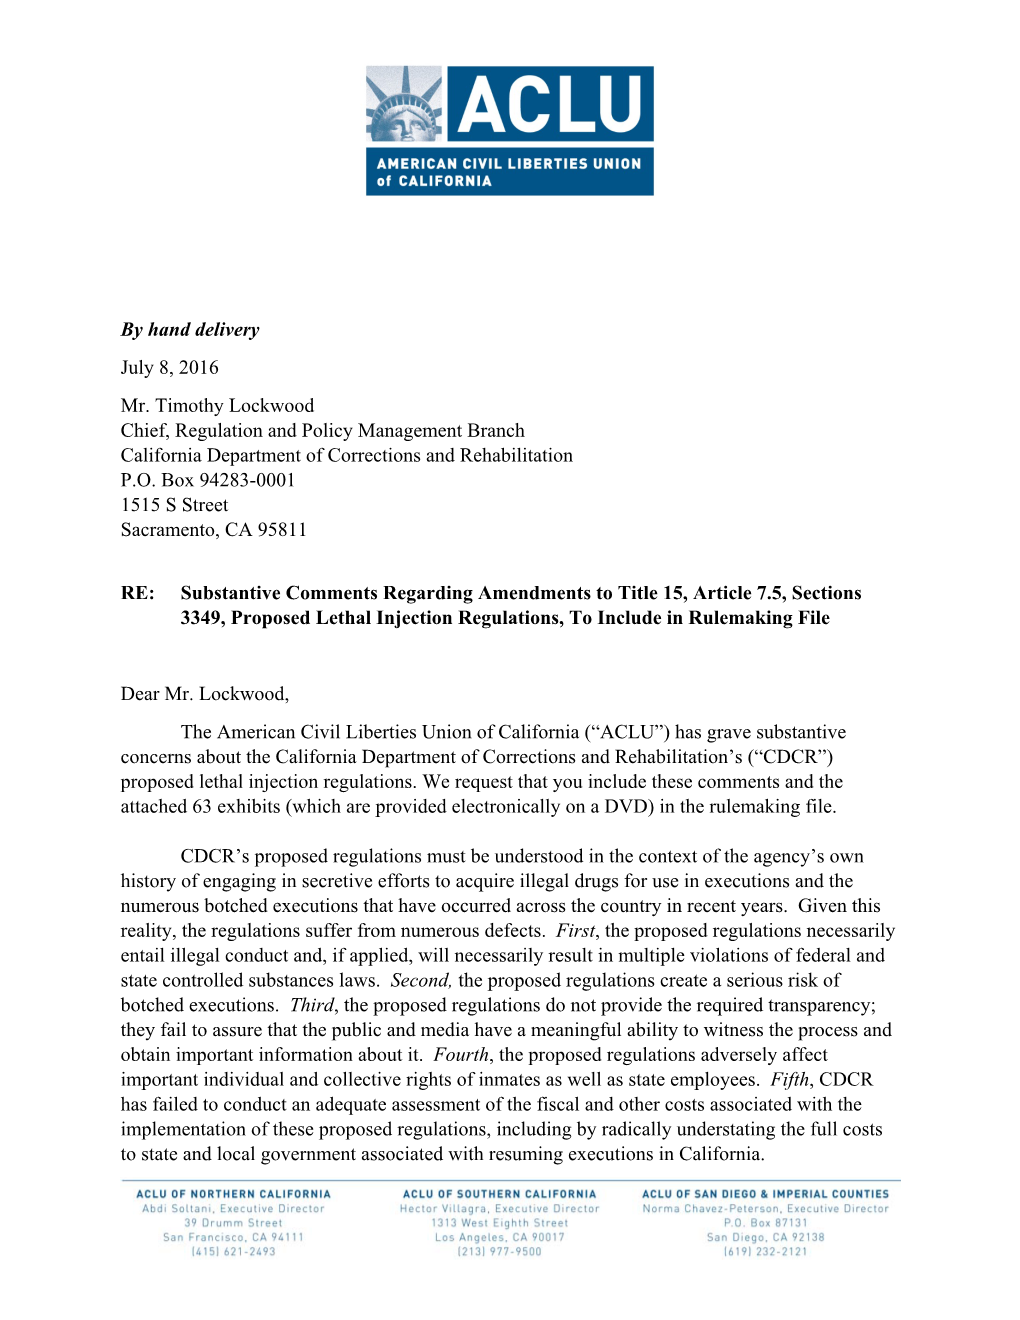 Substantive Comments Regarding Amendments to Title 15, Article 7.5, Sections 3349, Proposed Lethal Injection Regulations, to Include in Rulemaking File